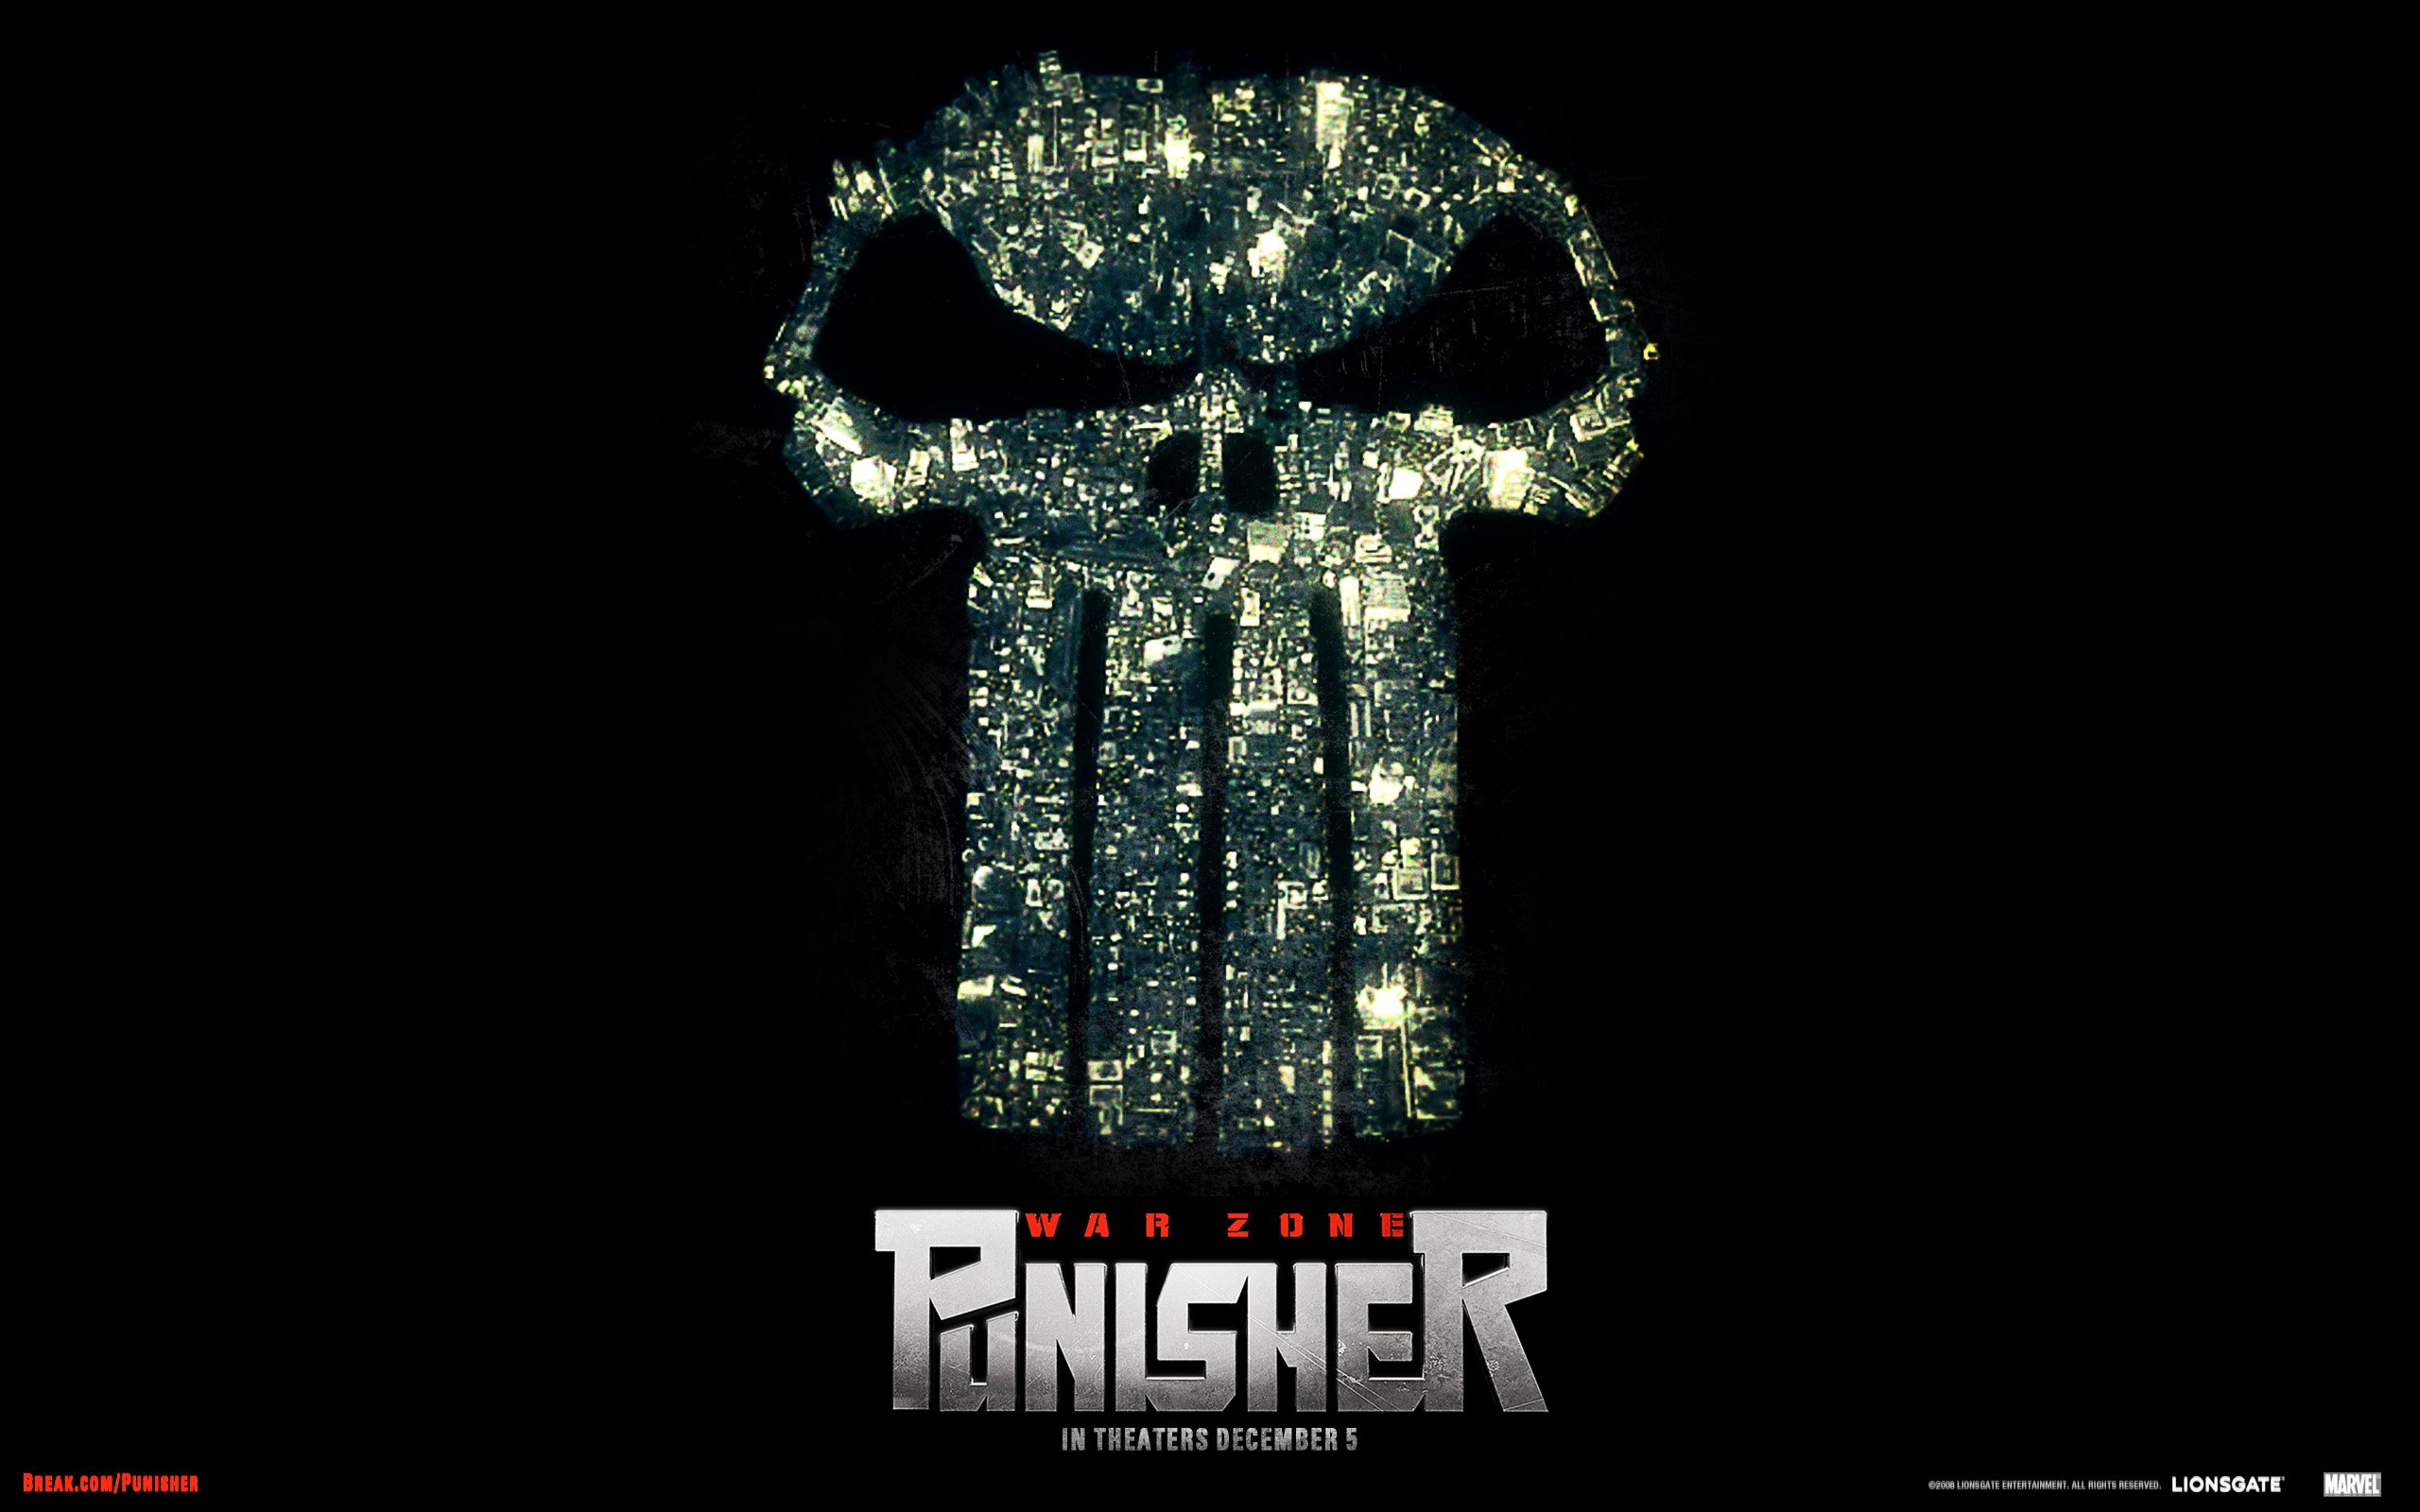 The Punisher Skull Wallpapers Free The Punisher Skull HD Wallpapers